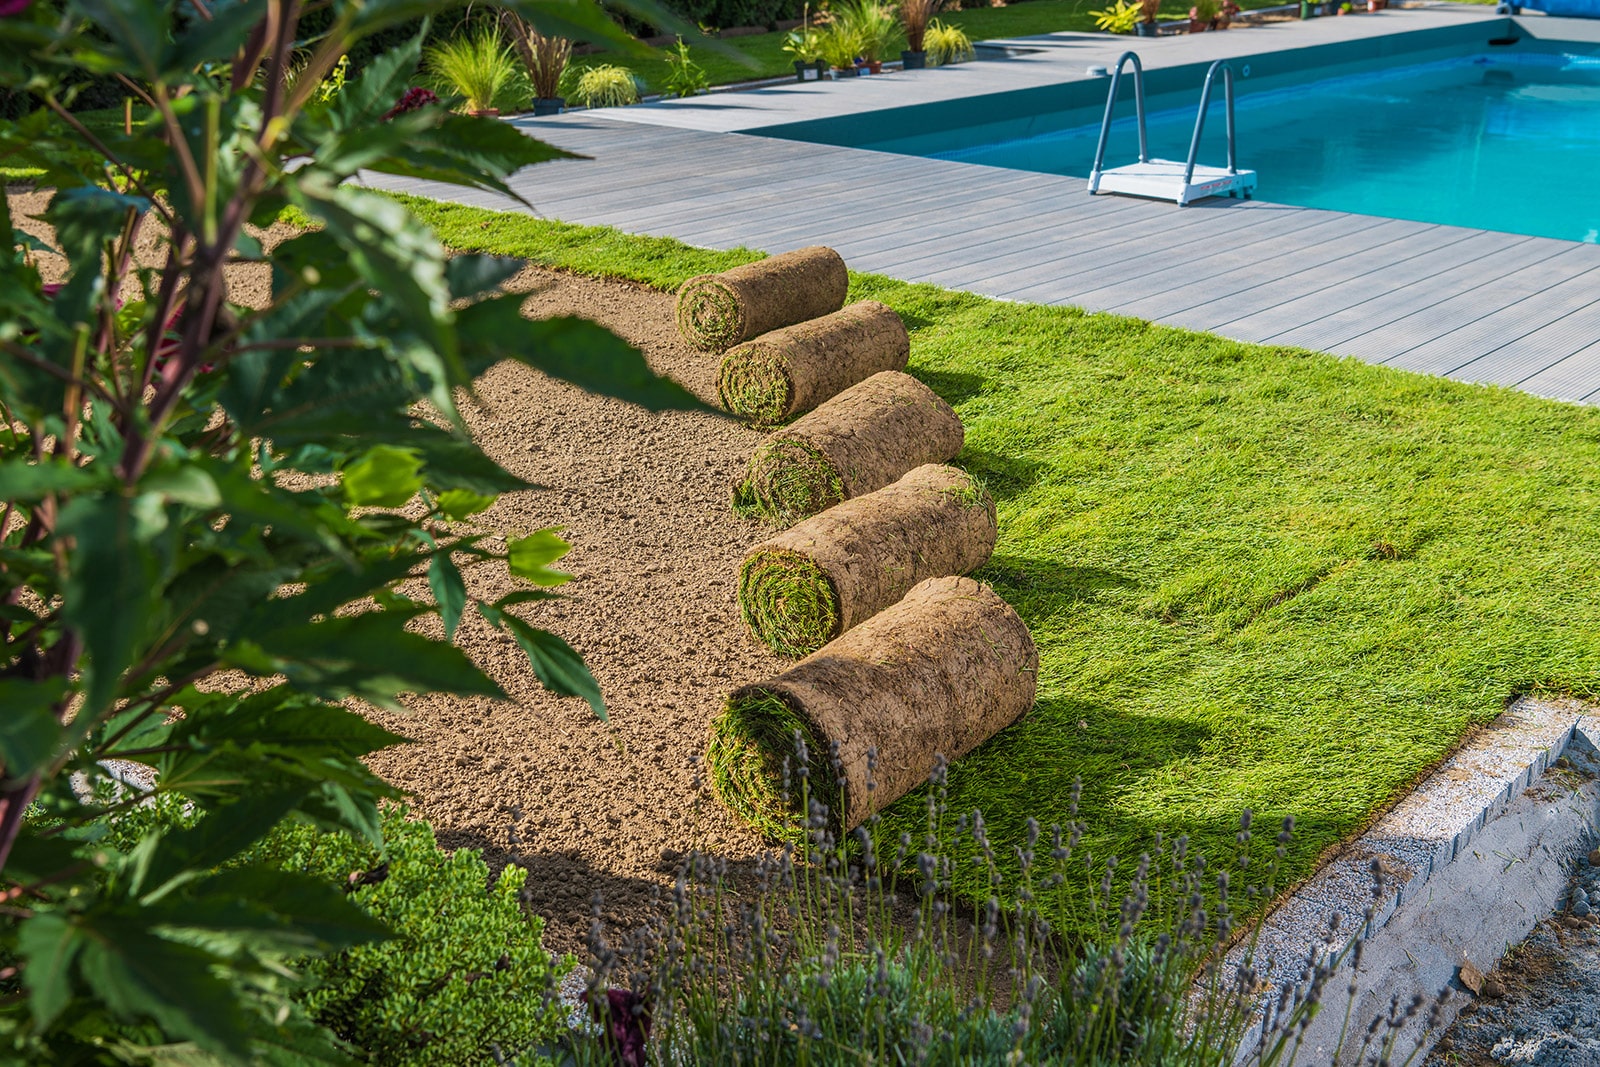 Rolls of grass being rolled out next to a pool